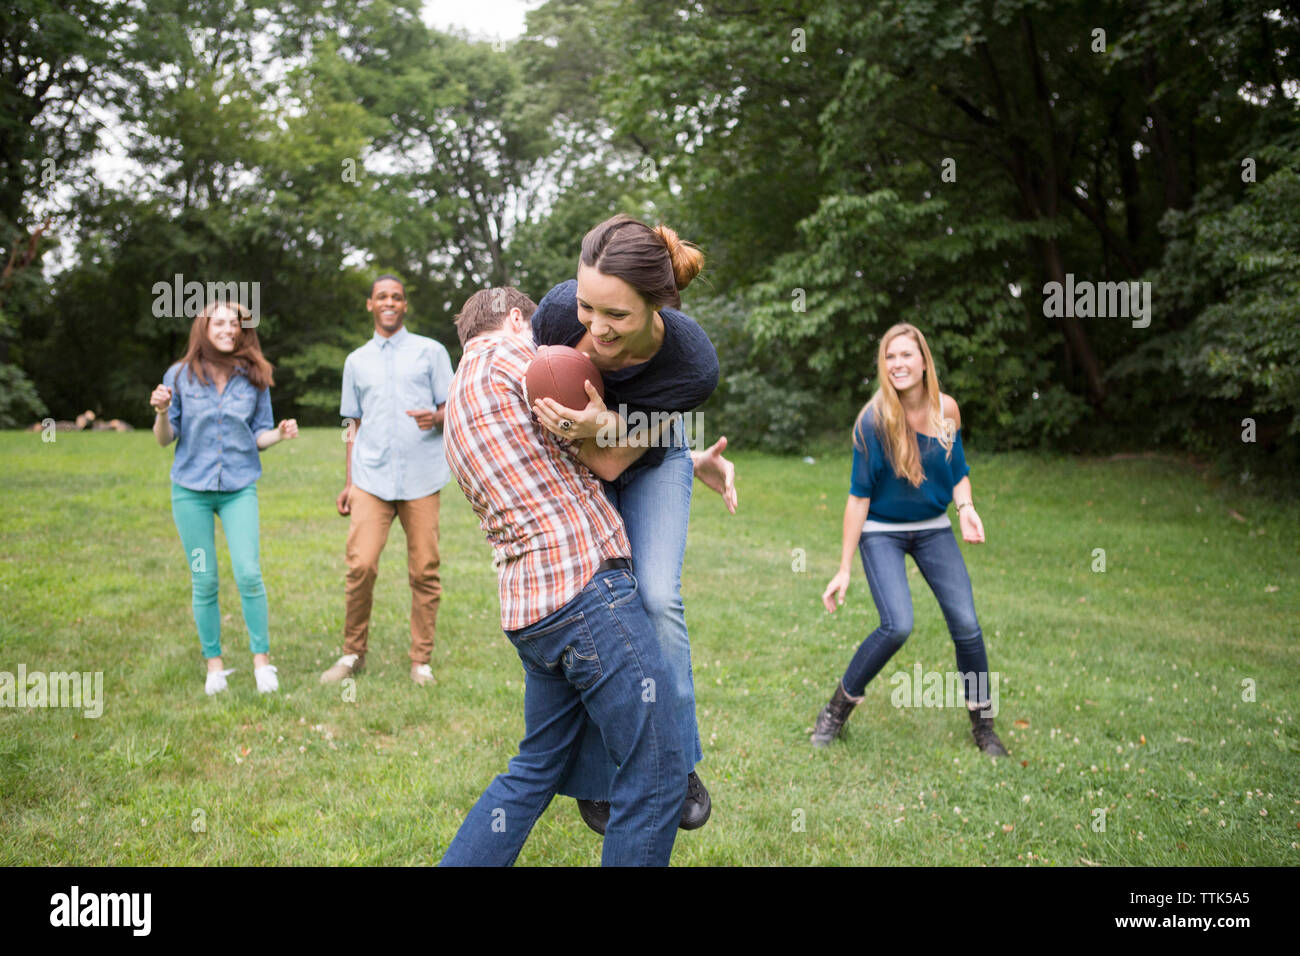 Man defending woman holding football ball while friends watching them on field Stock Photo